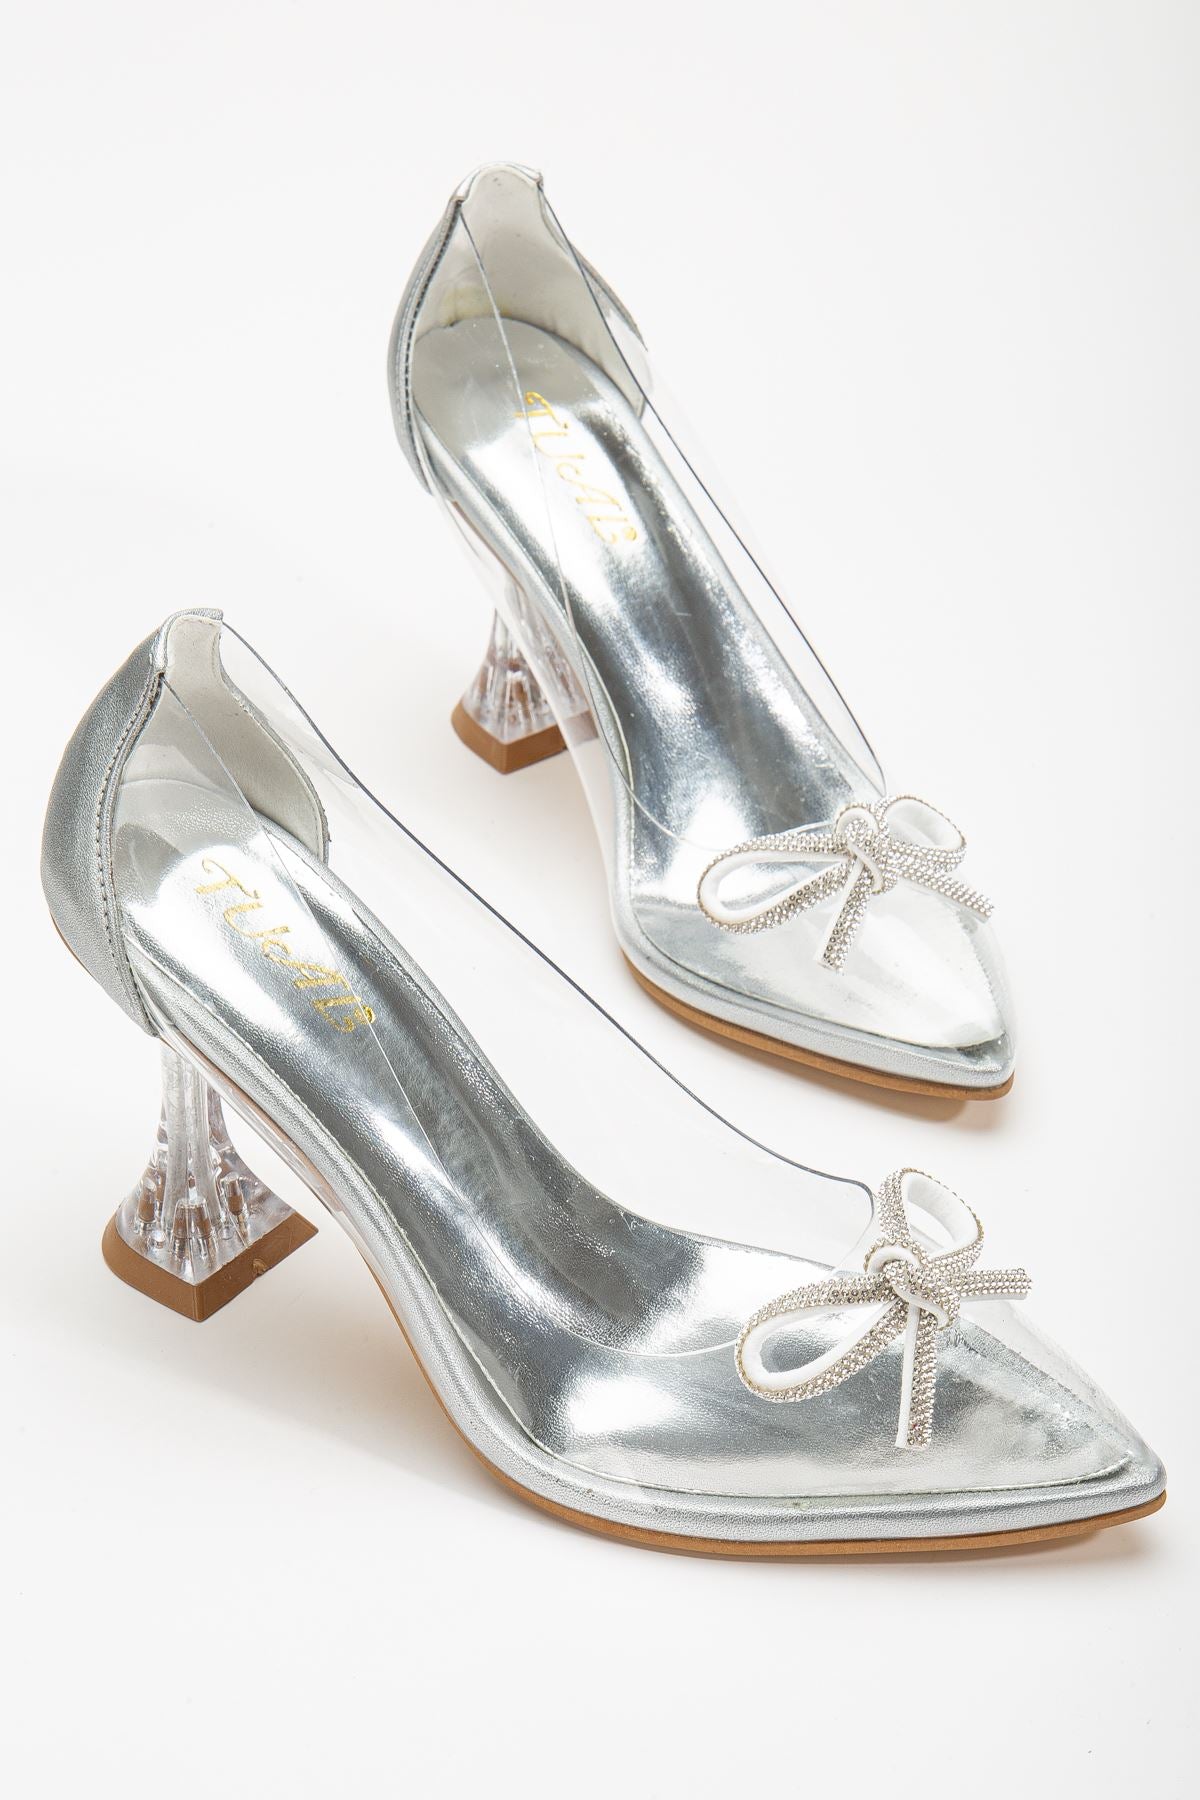 Women's Silver Stiletto Stone Transparent Heeled Shoes - STREETMODE ™